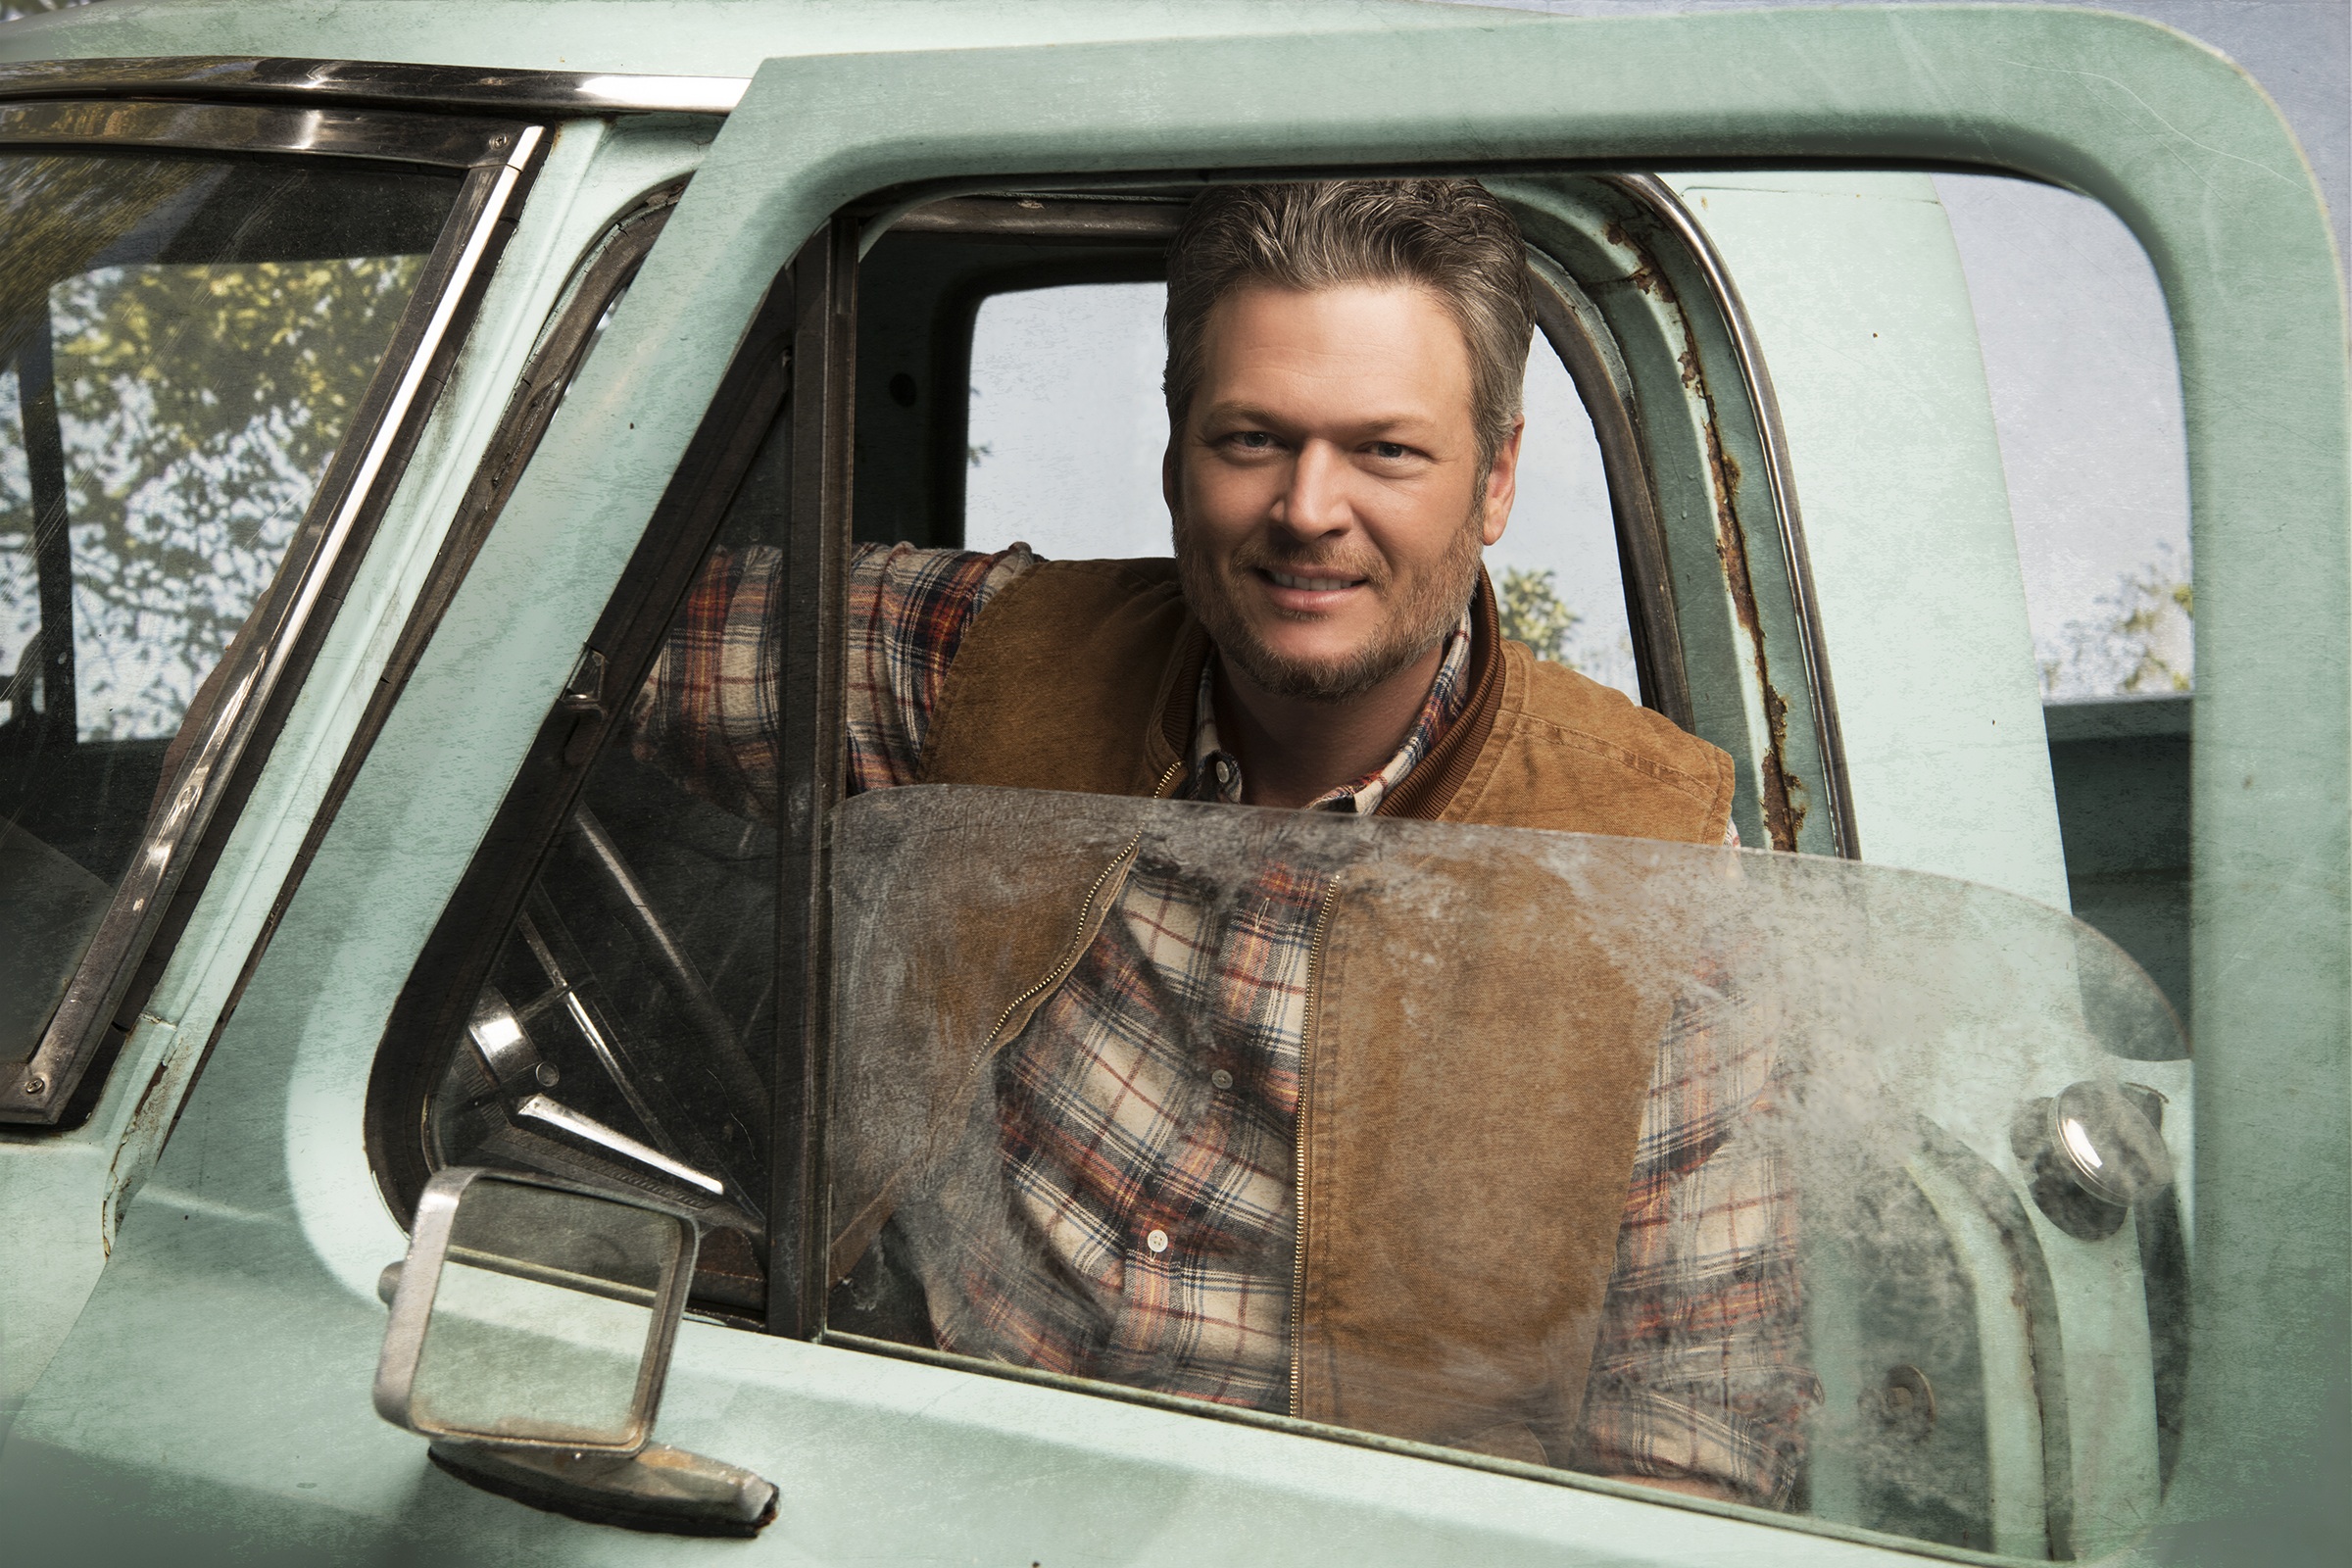 Circle Network Launches on Peacock with a Blake Shelton Takeover